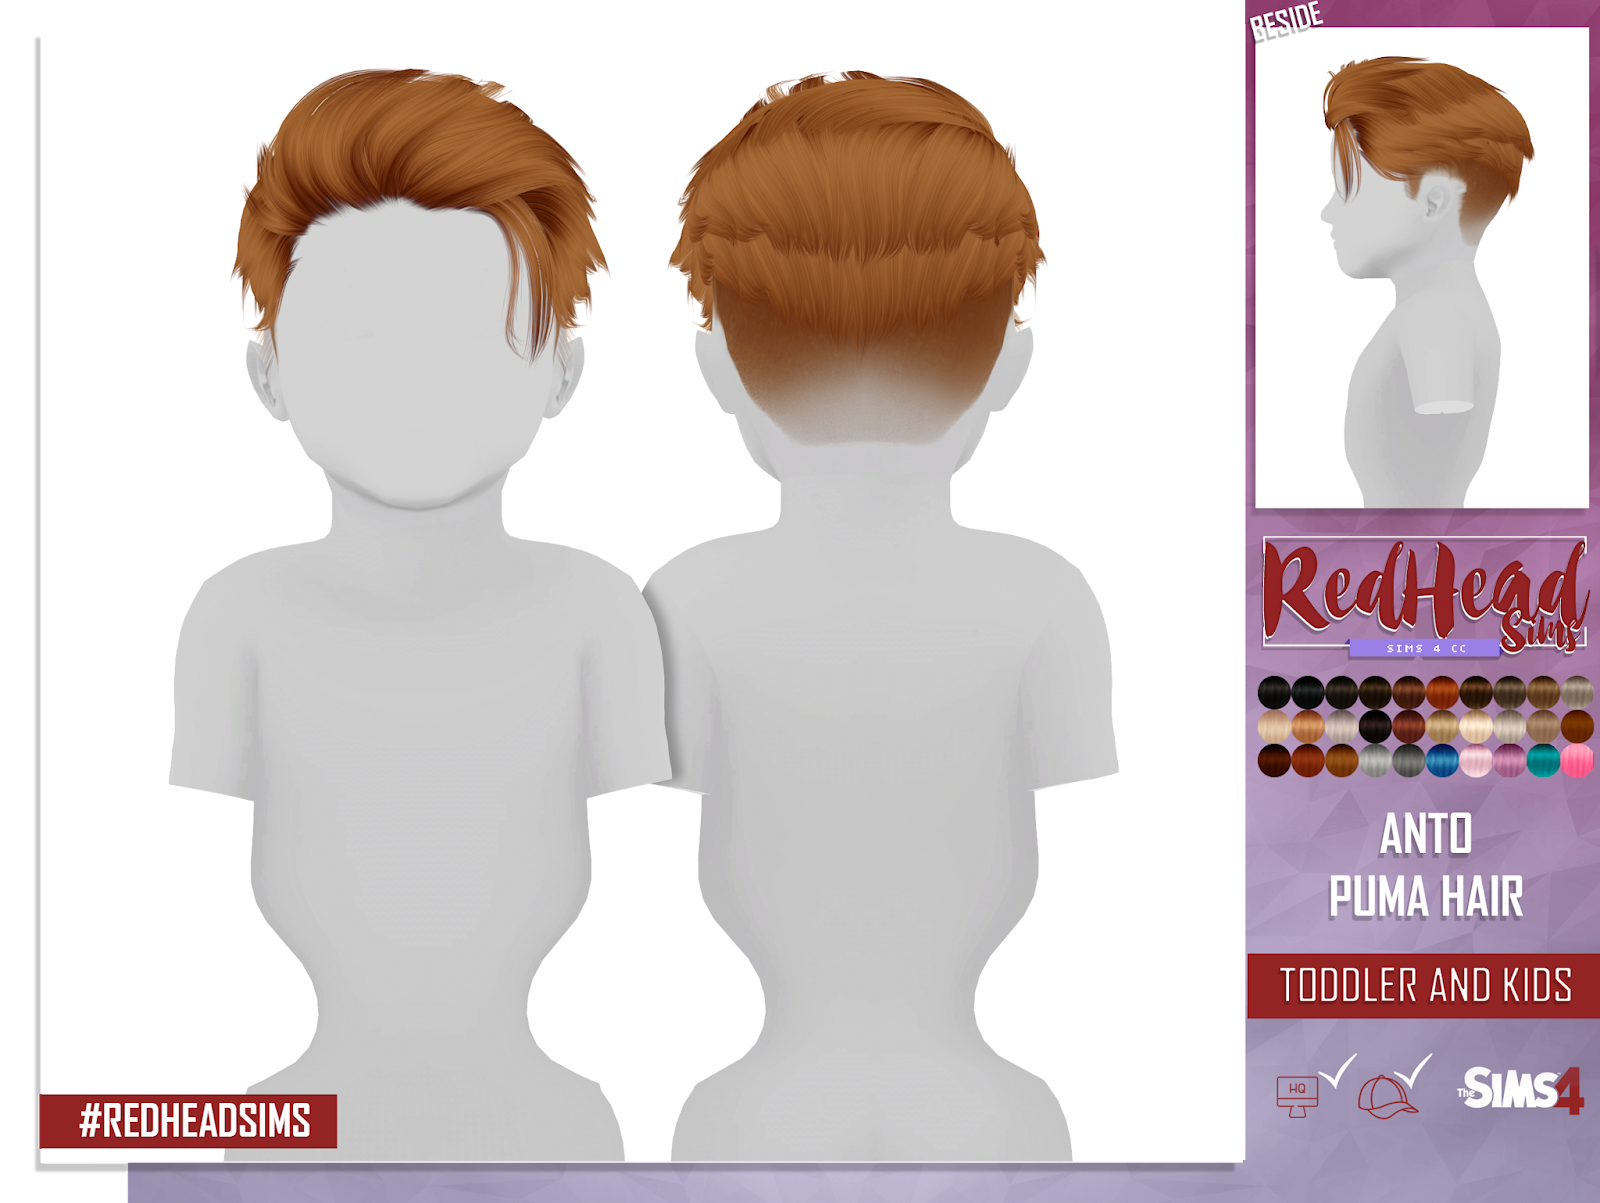 ANTO - KIDS AND TODDLER VERSION REDHEADSIMS - CC